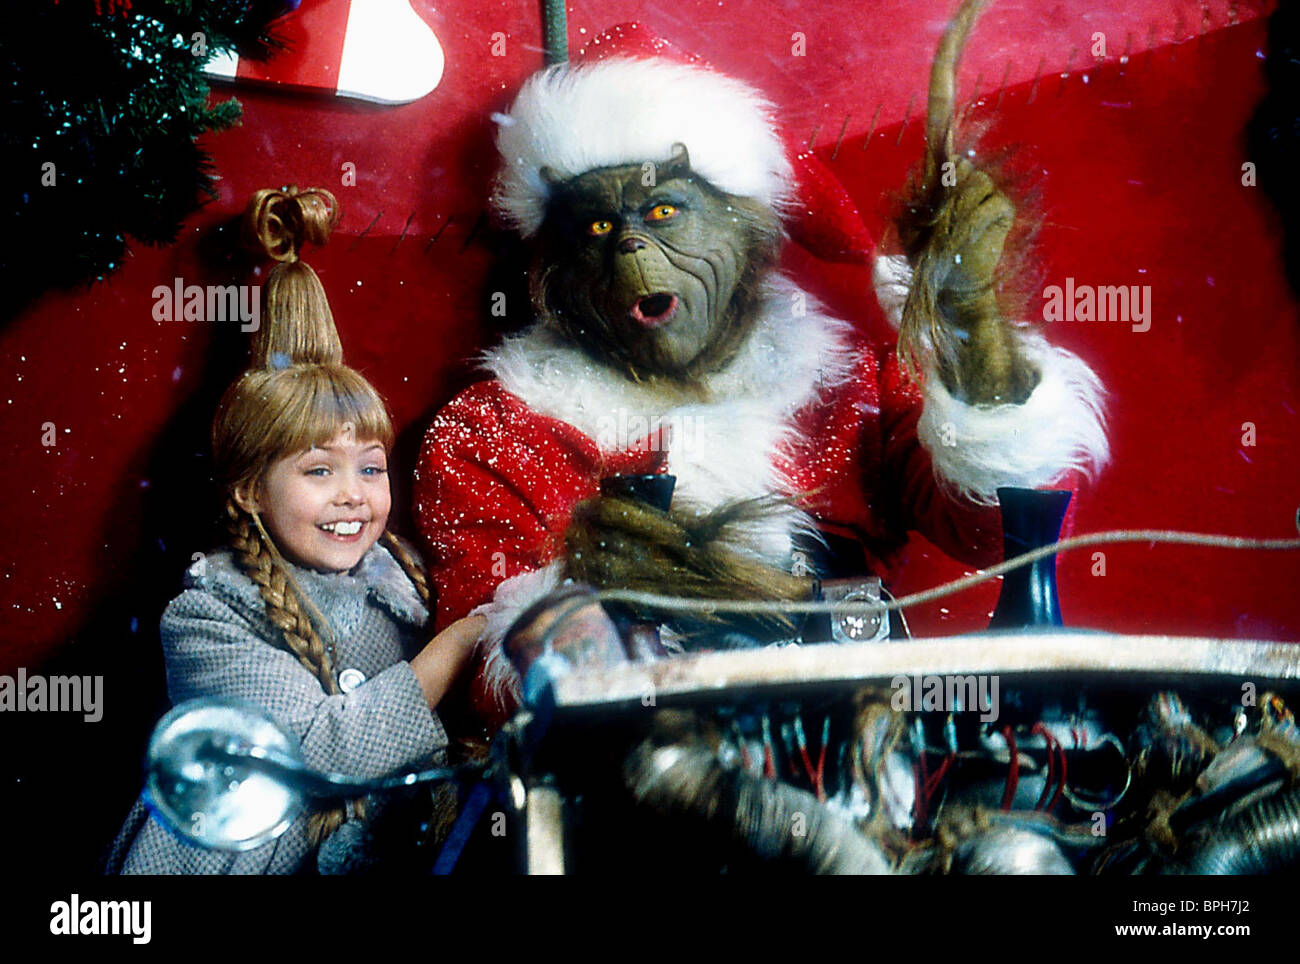 TAYLOR MOMSEN, JIM CARREY, HOW THE GRINCH STOLE CHRISTMAS, 2000 Stock Photo  - Alamy